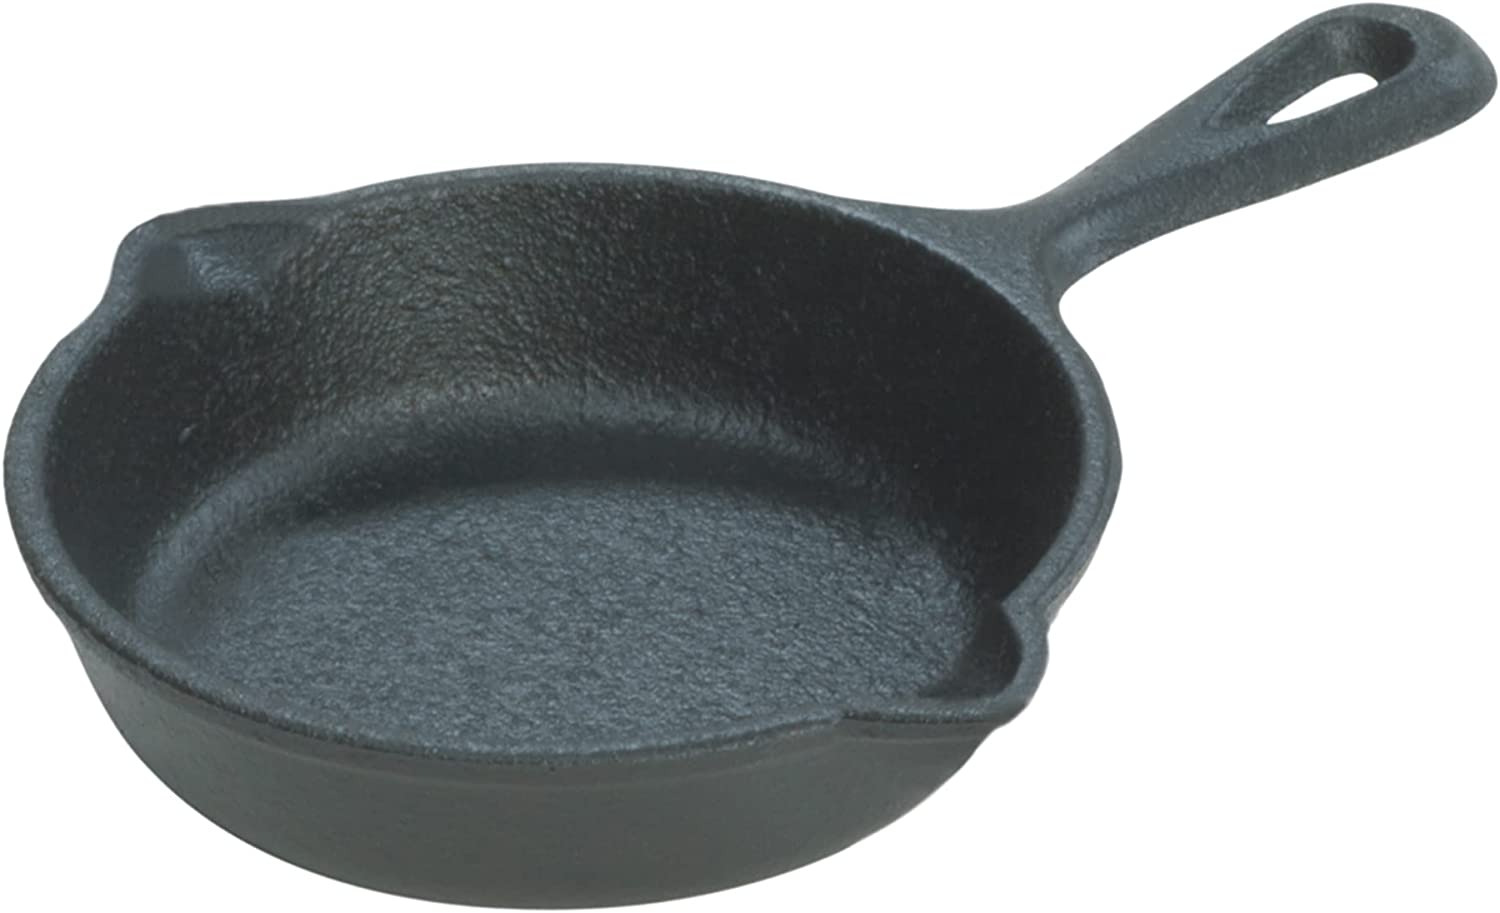 Lodge Miniature Skillet 5 Cubic Feet Capacity 3.5 inches in diameter